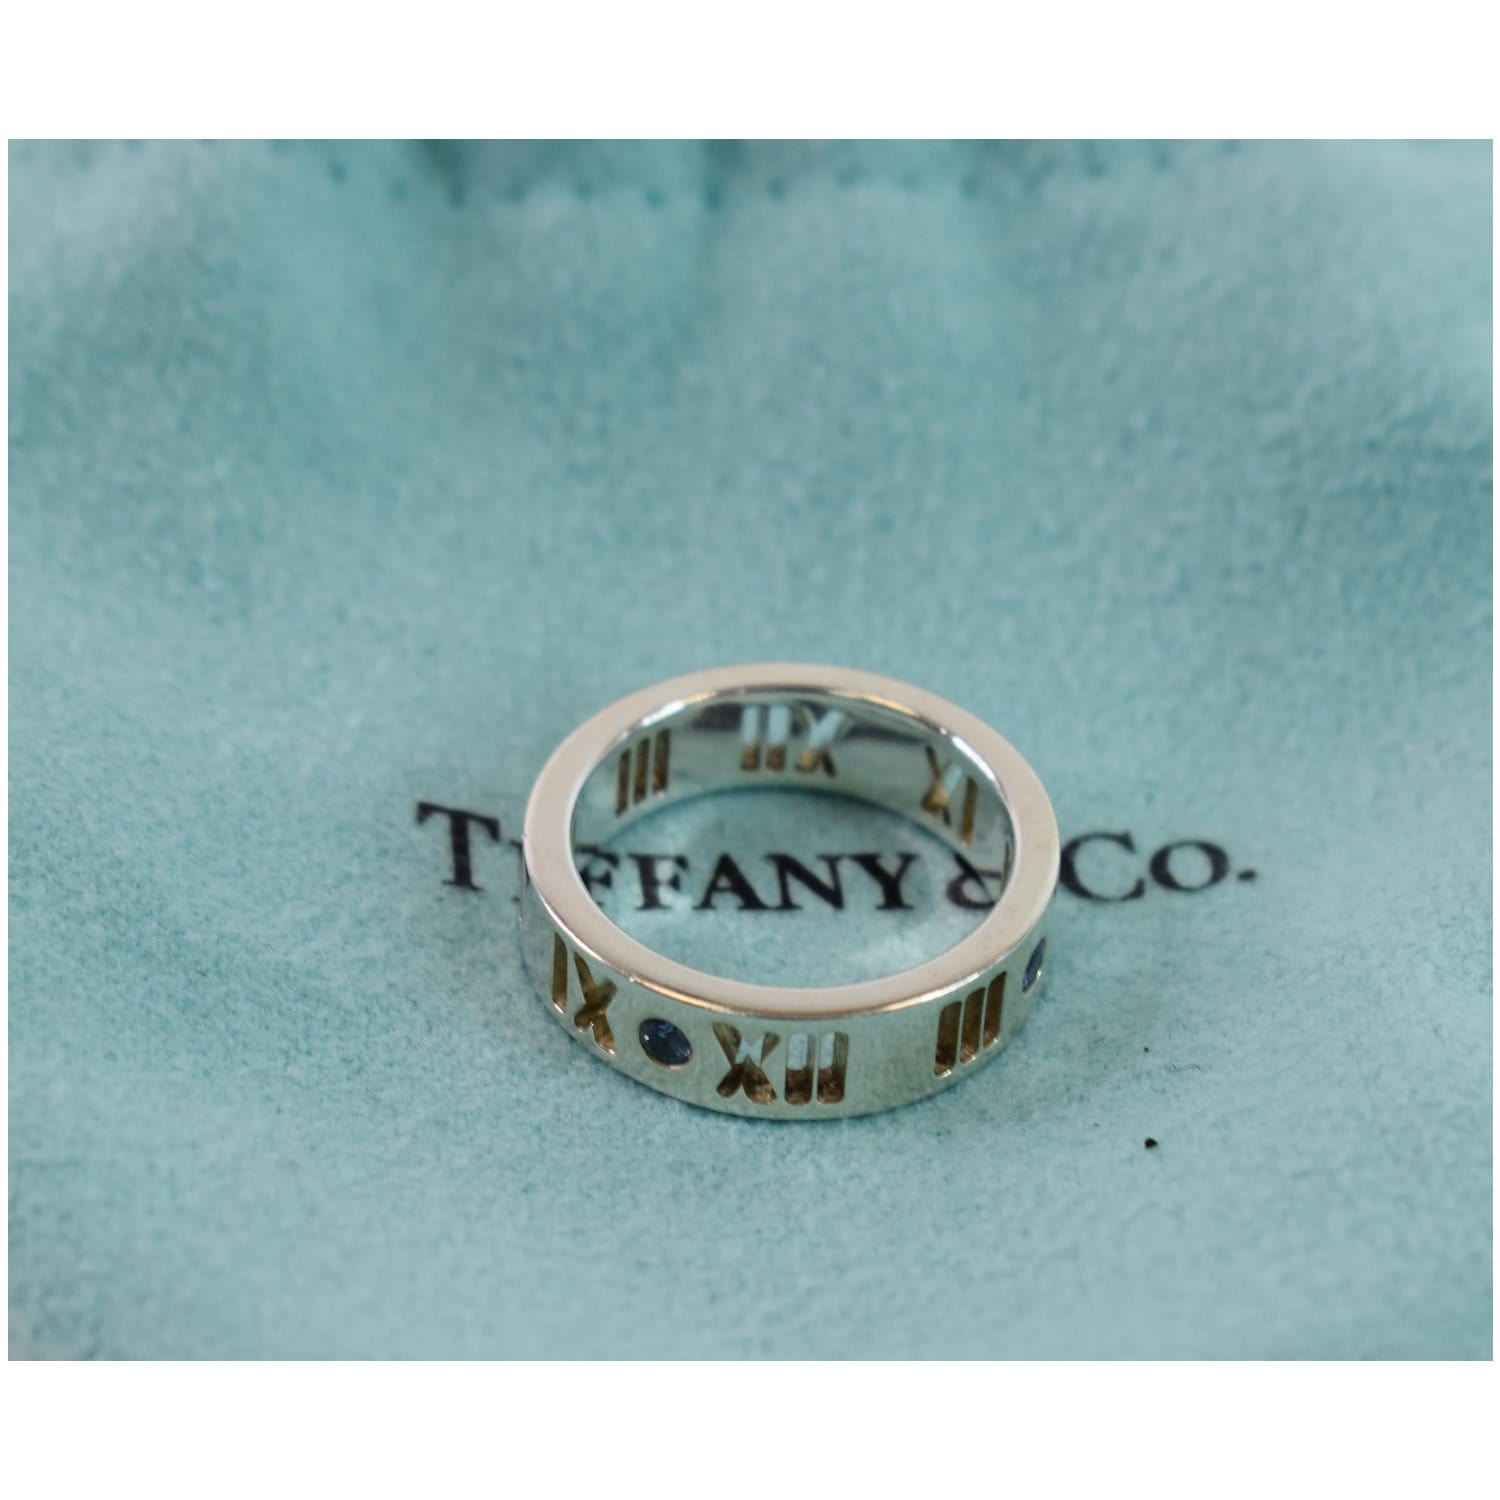 tiffany and co ag 925